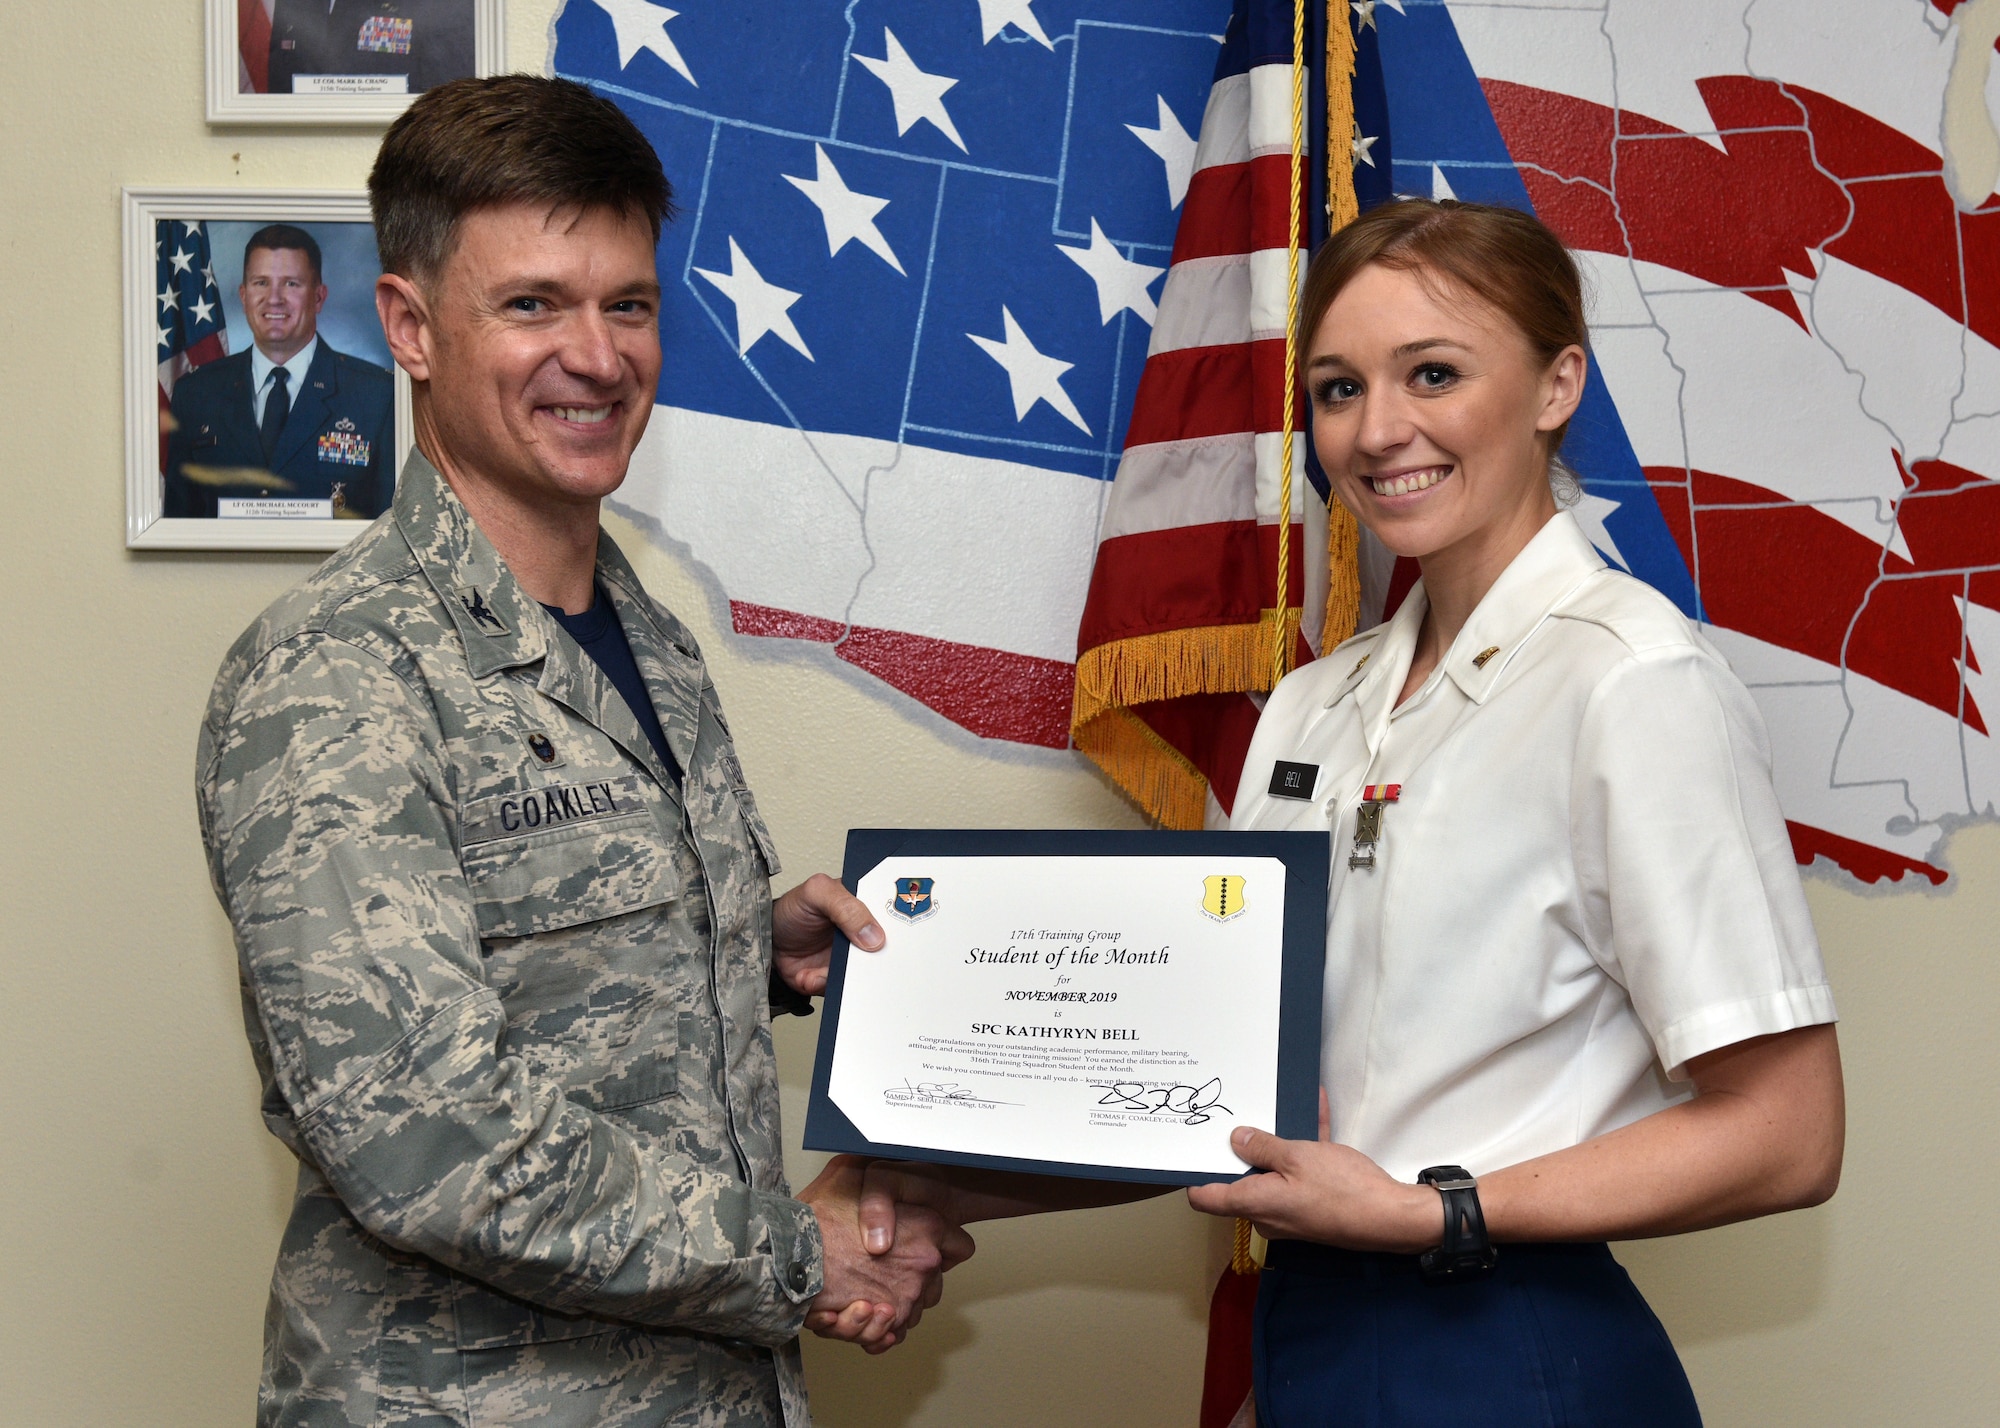 U.S. Air Force Col. Thomas Coakley, 17th Training Group commander, presents the 316th Training Squadron Student of the Month award to Spc. Kathryn Bell, 316th TRS student, at Brandenburg Hall on Goodfellow Air Force Base, Texas, Dec. 6, 2019. The 316th TRS’s mission is to conduct U.S. Air Force, U.S. Army, U.S. Marine Corps, U.S. Navy and U.S. Coast Guard cryptologic, human intelligence and military training. (U.S. Air Force photo by Airman 1st Class Robyn Hunsinger)